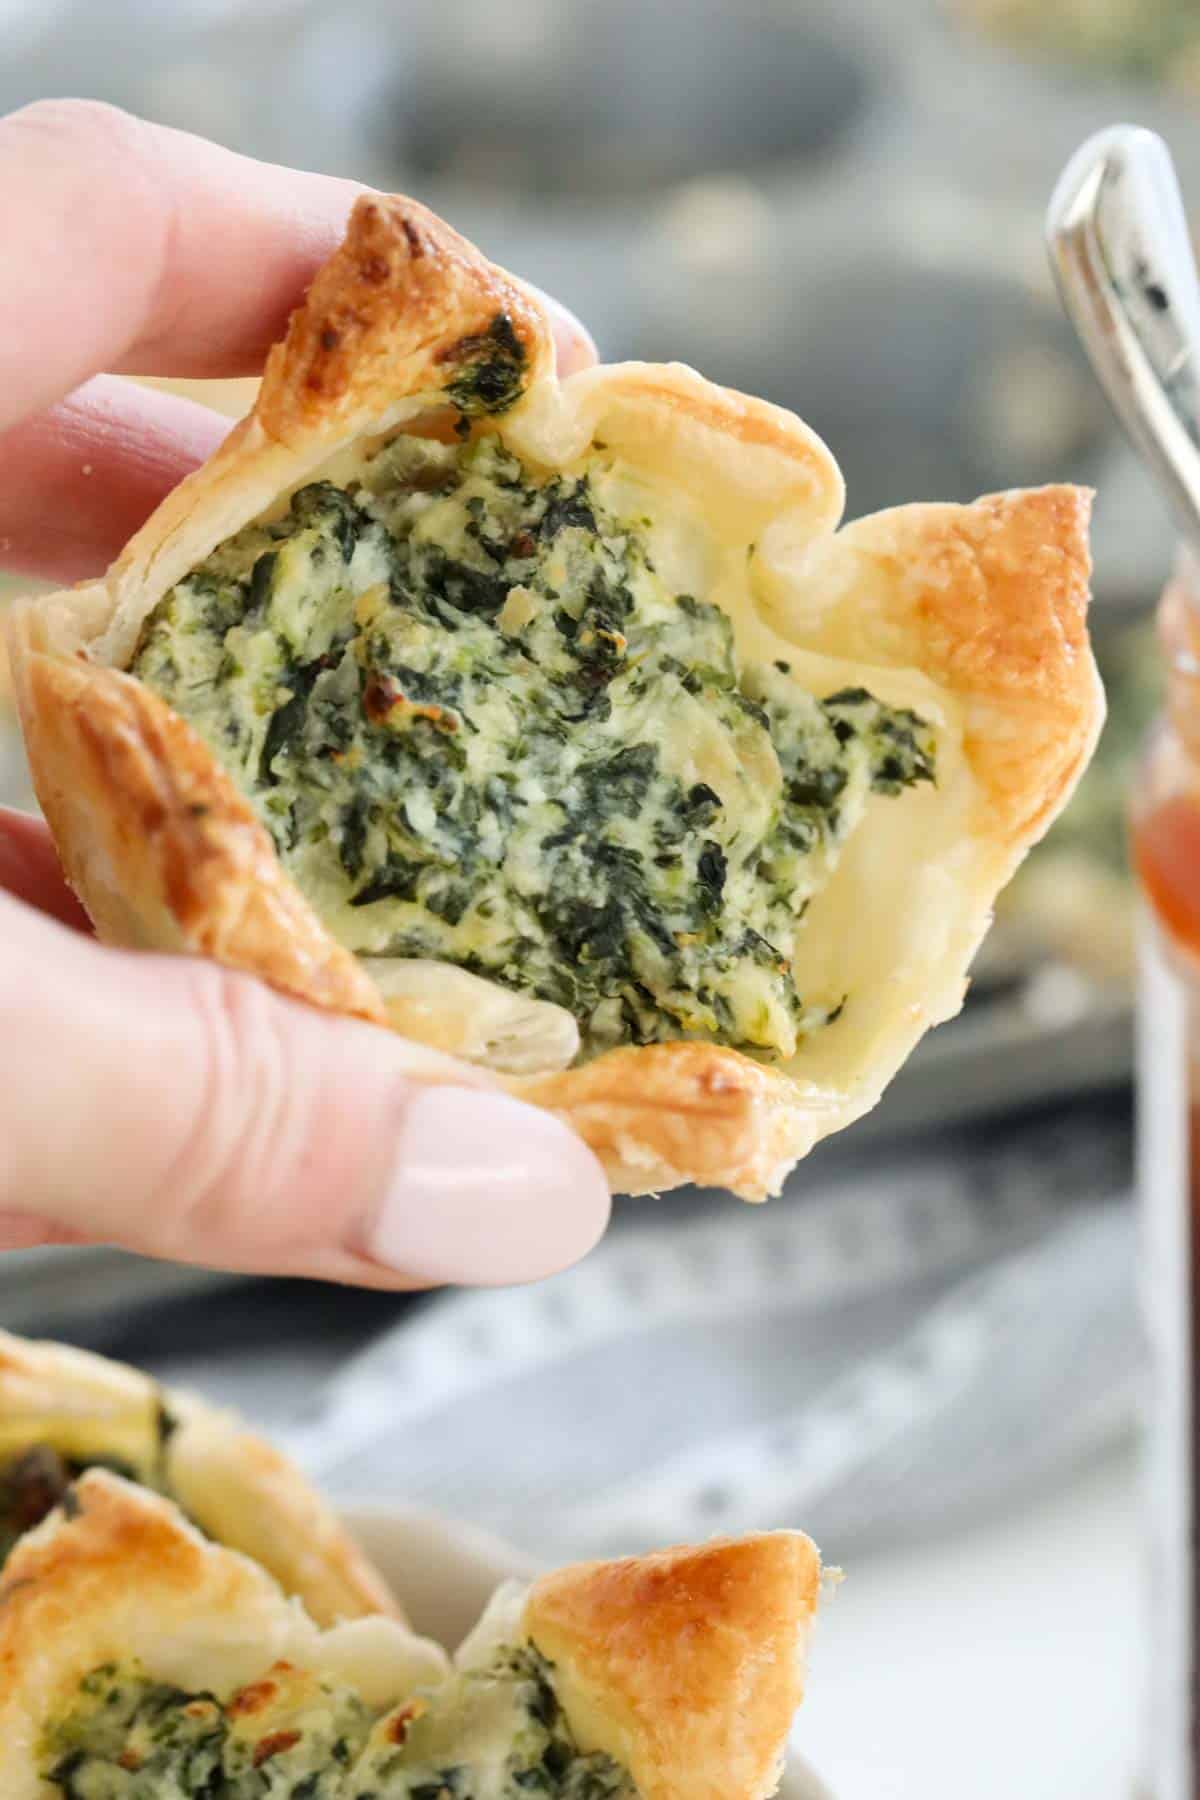 A hand holding a savoury spinach pastry.